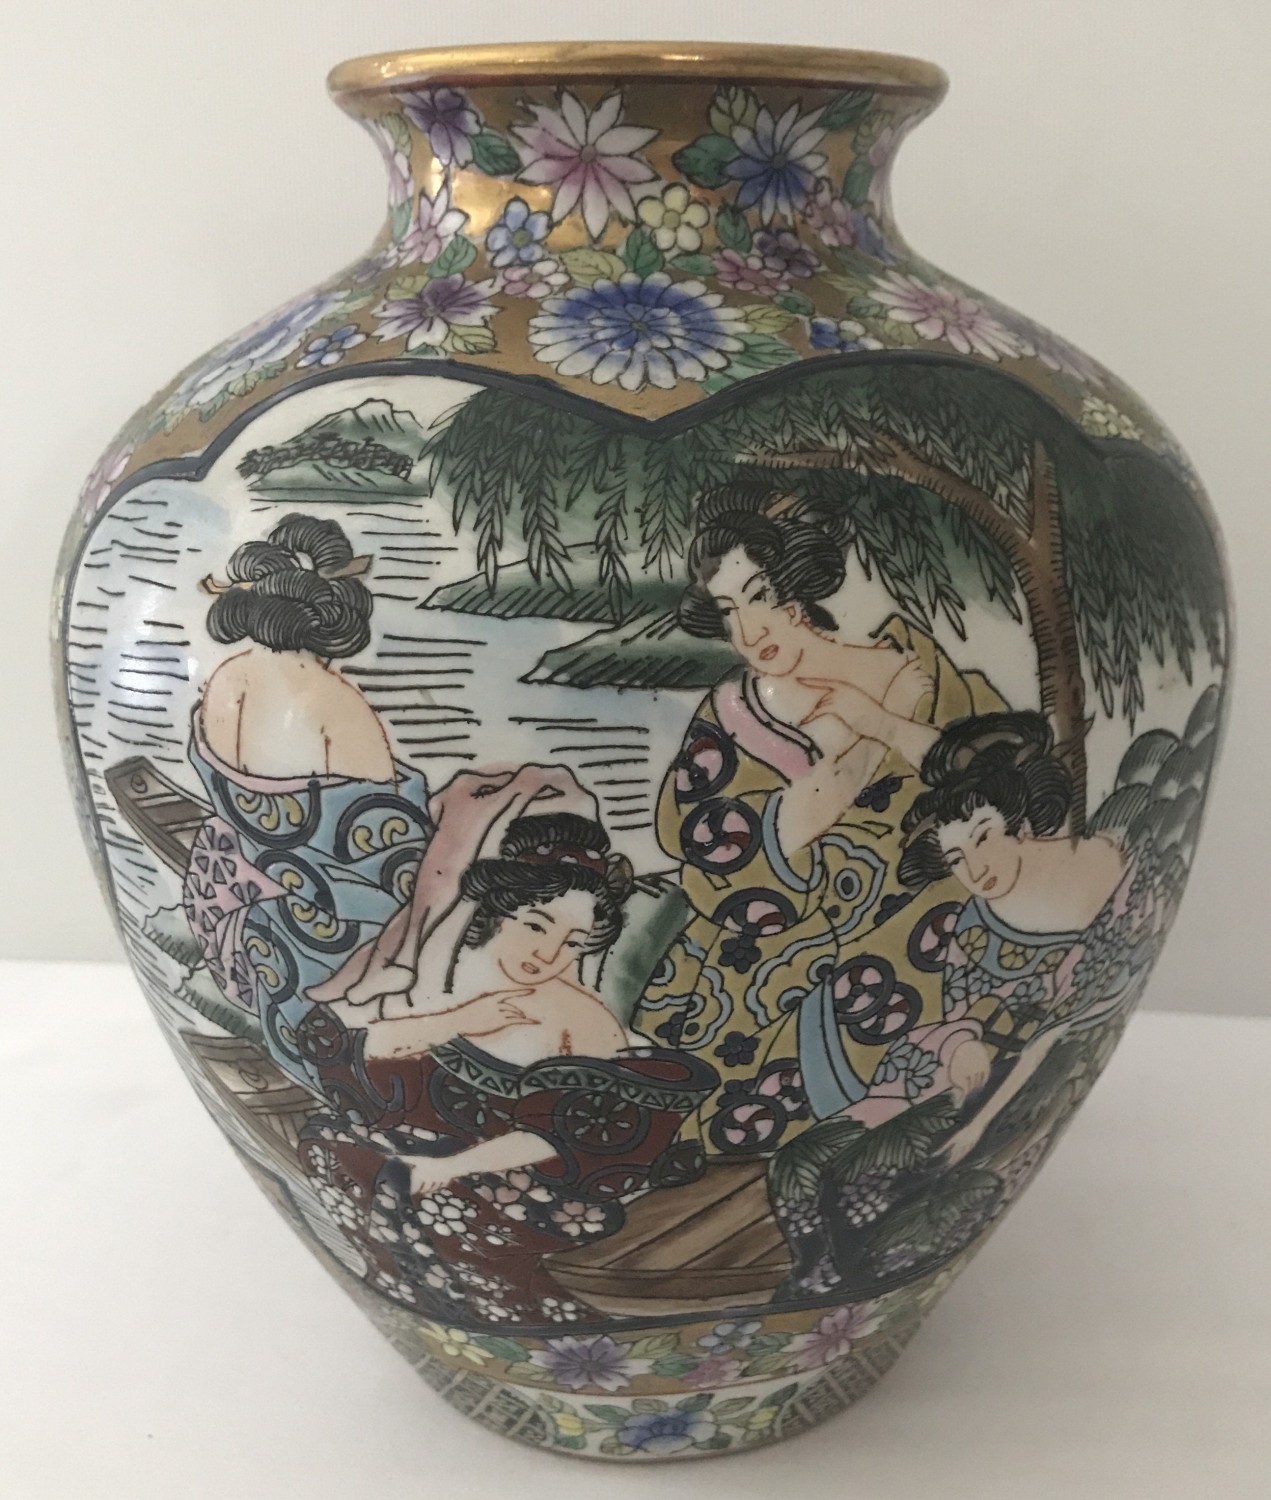 A bulbous shaped Famille Rose vase depicting oriental ladies getting ready to bathe.